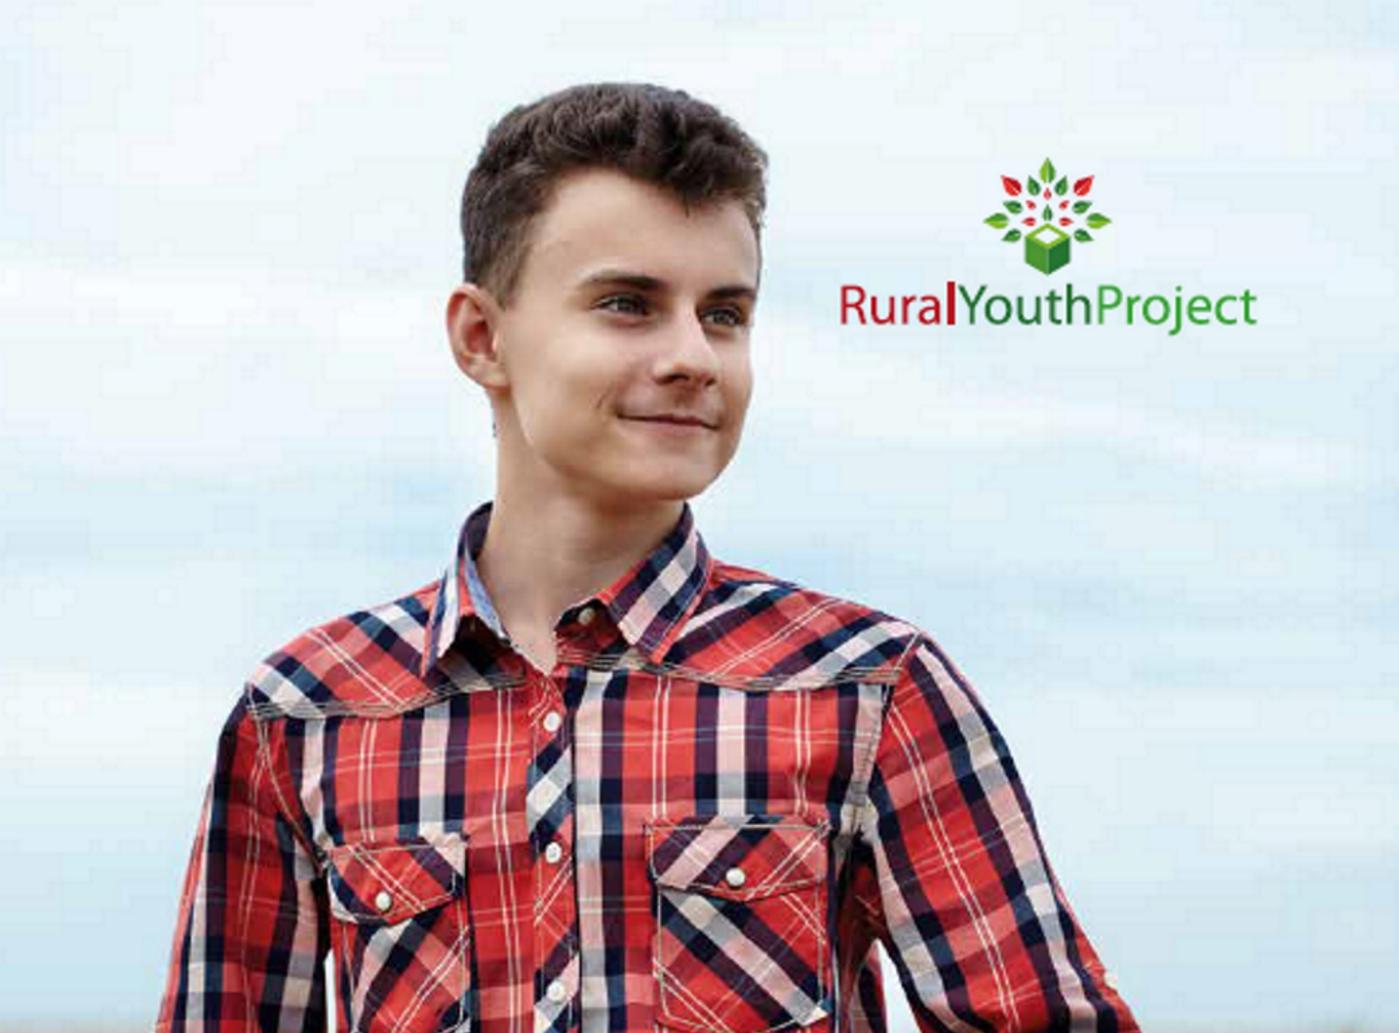 Rural youth project survey results